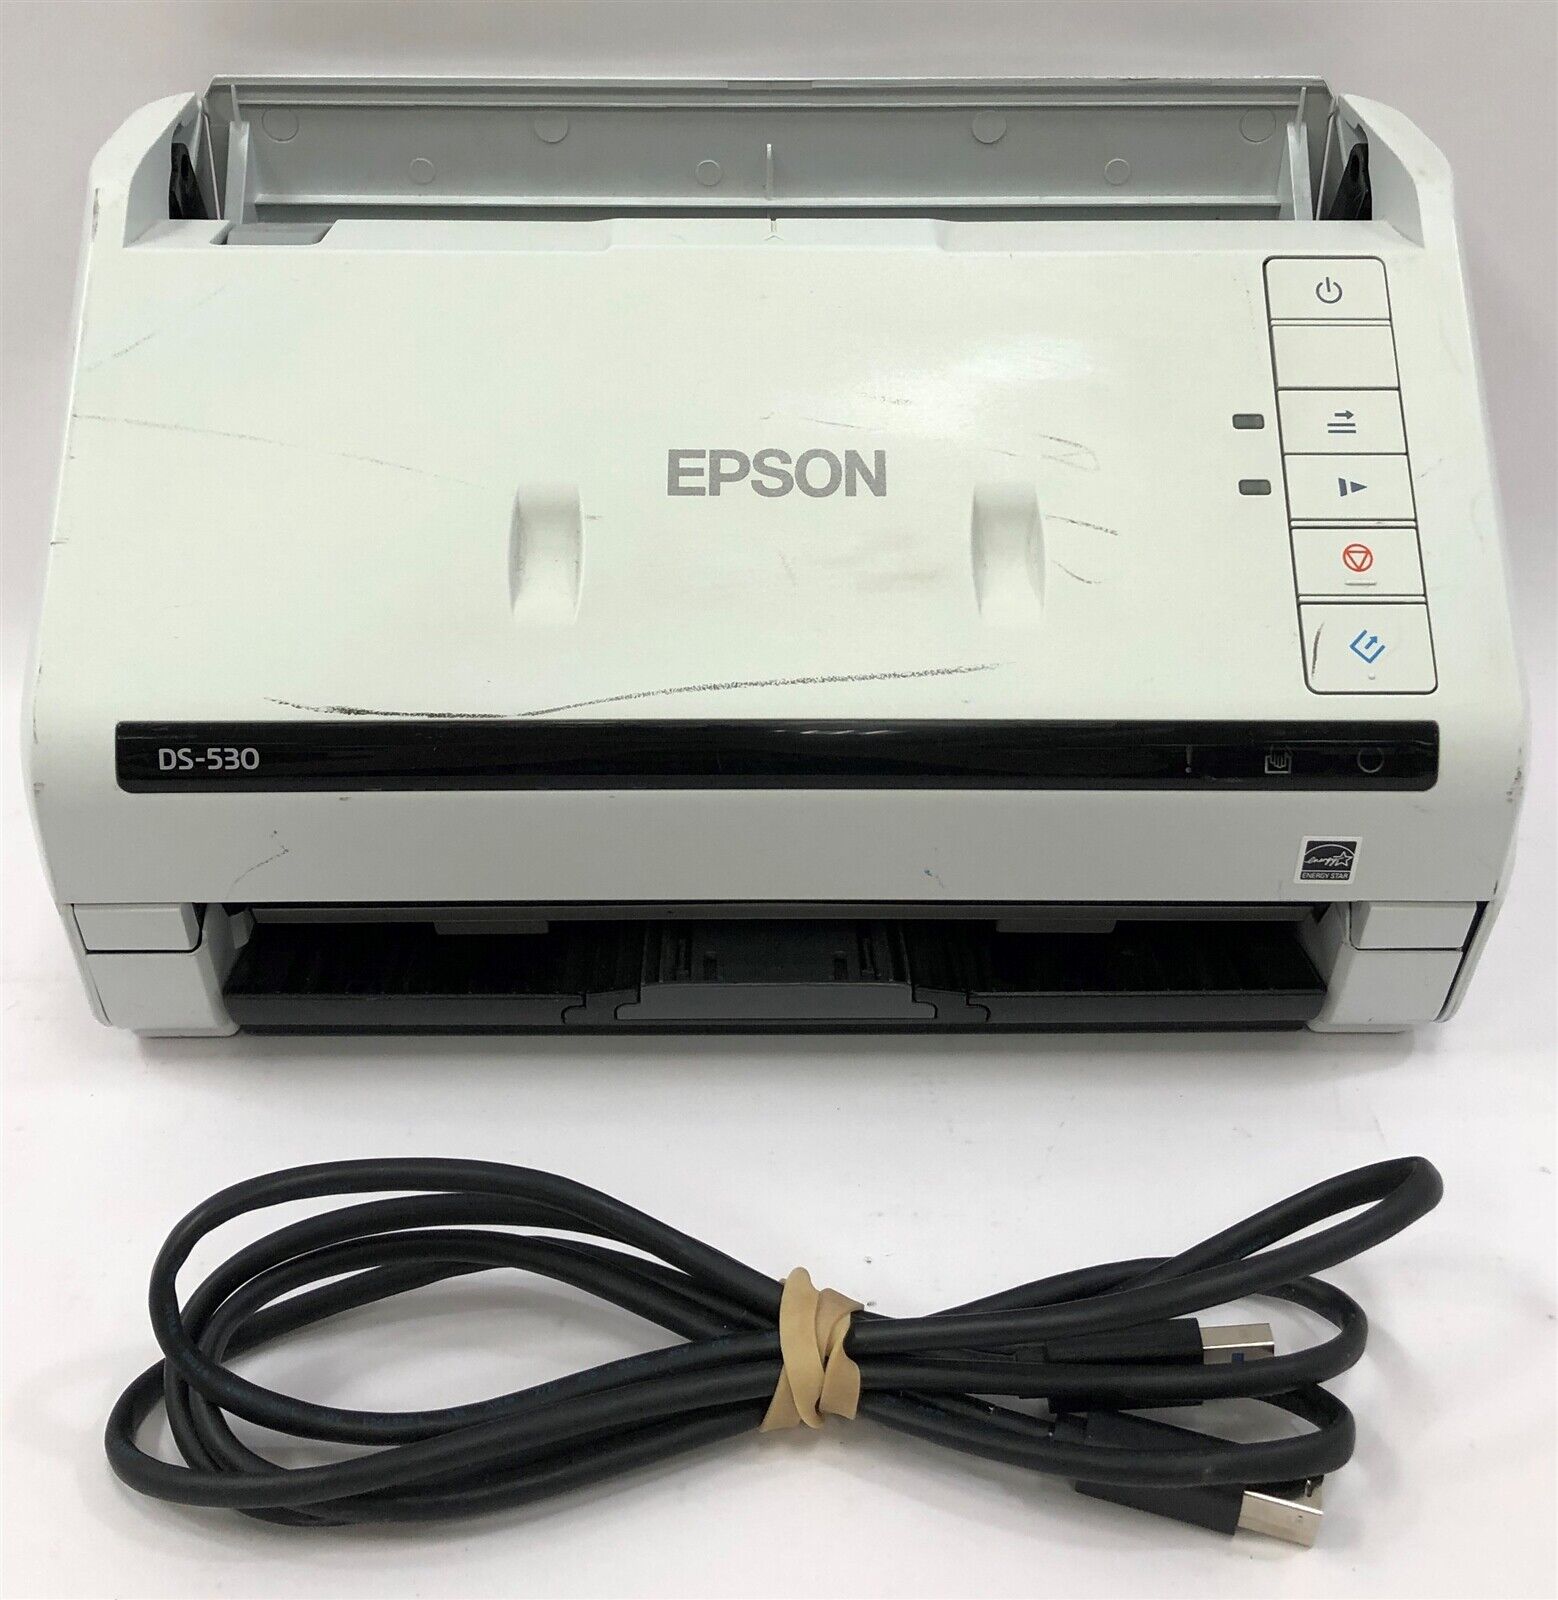 Epson DS-530 Duplex Color Scanner - No Feed Tray